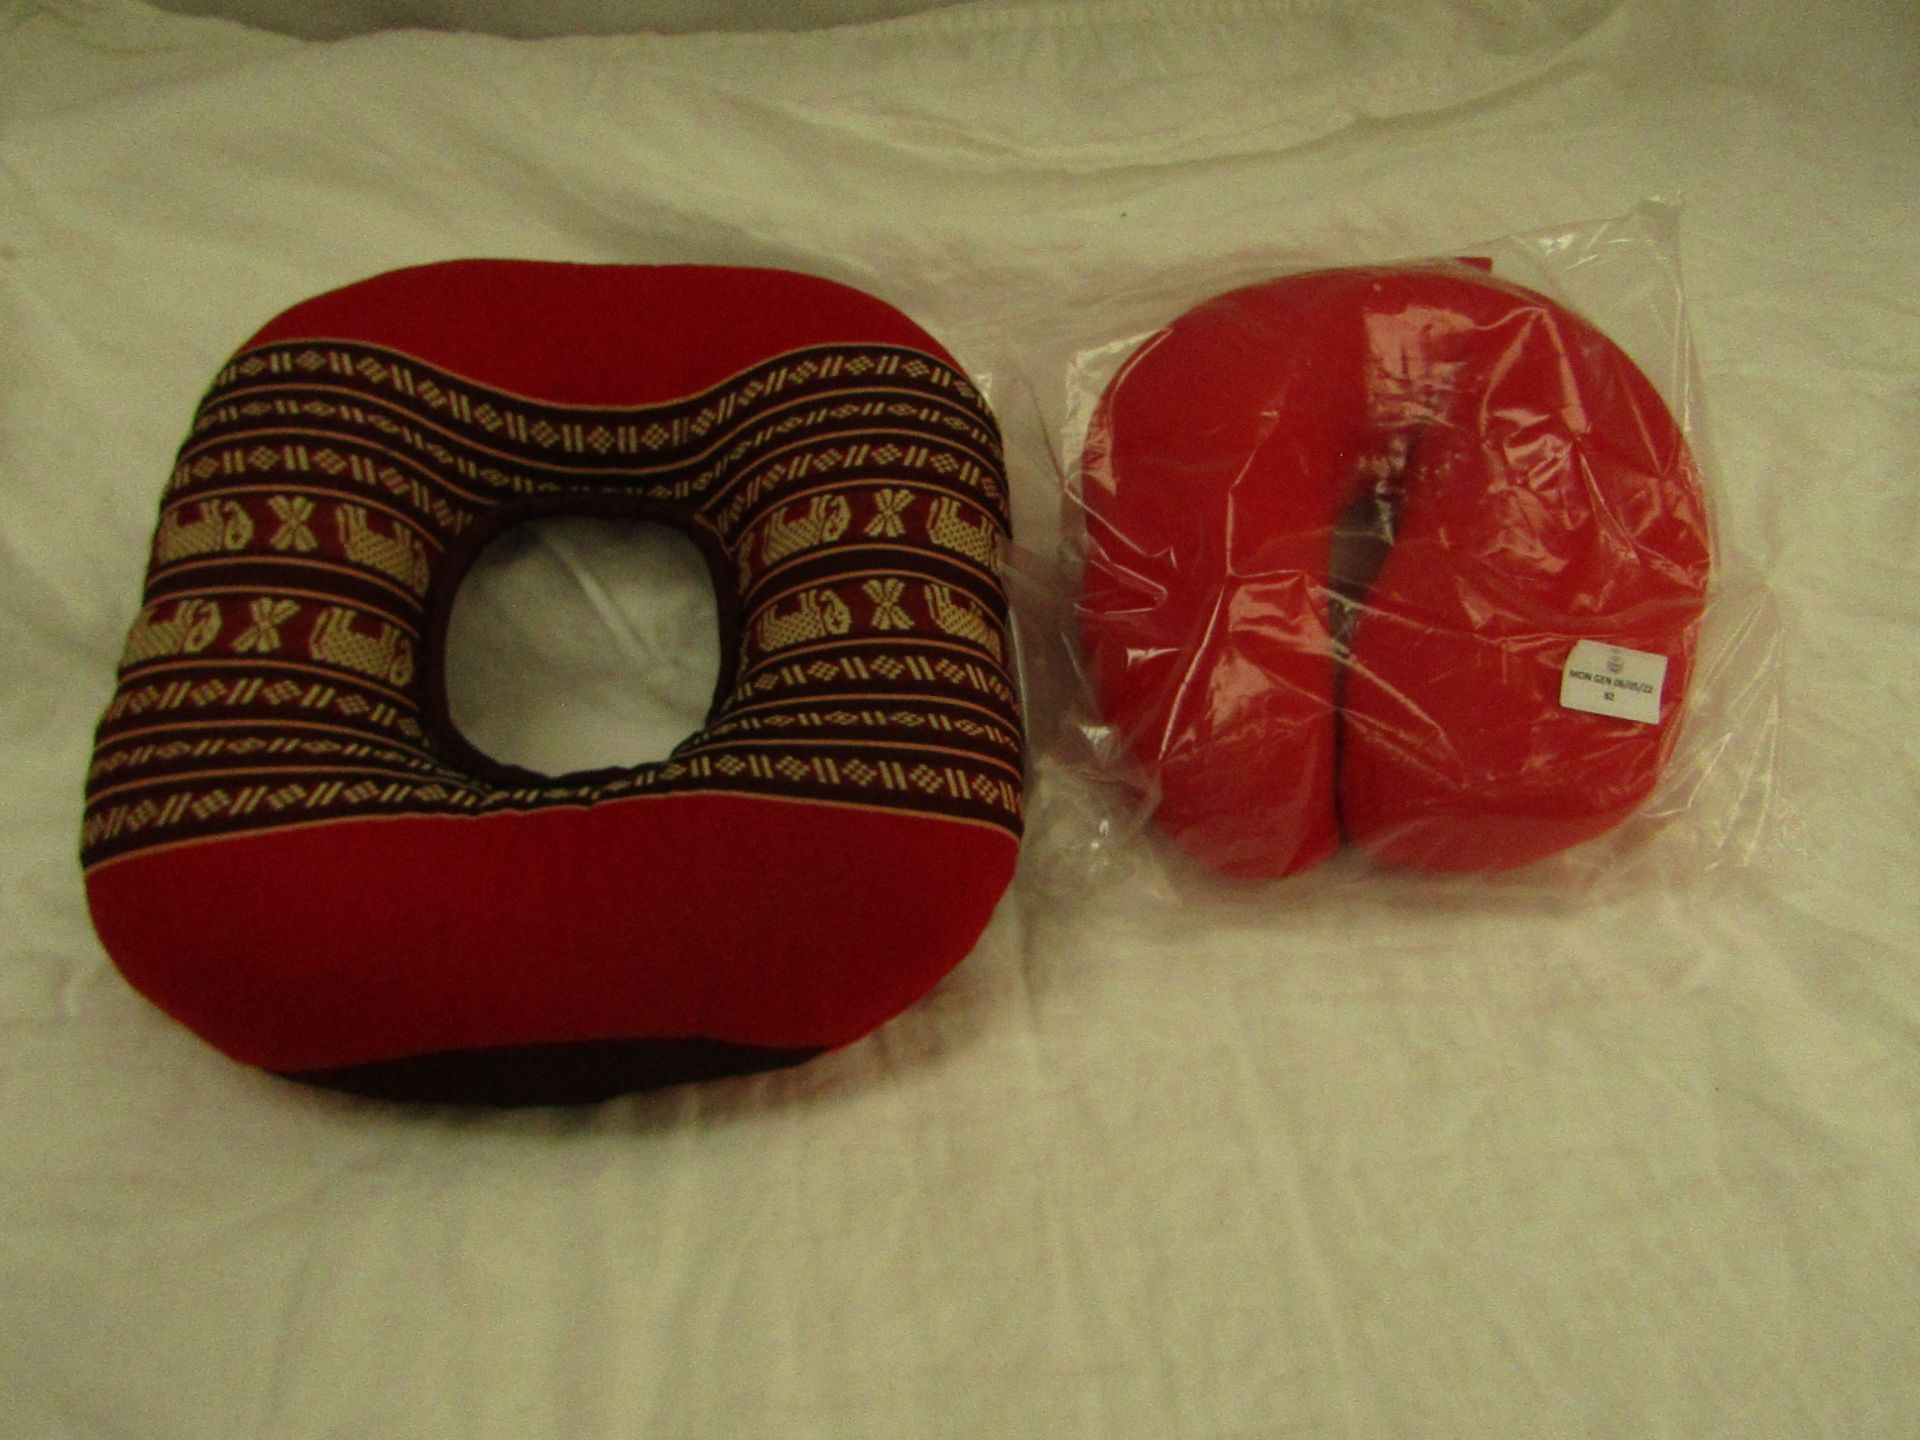 1x Unbranded - Red Neck Cushion - Non Original Packaging. 1x Circular Seat Cushion - No Packaging.